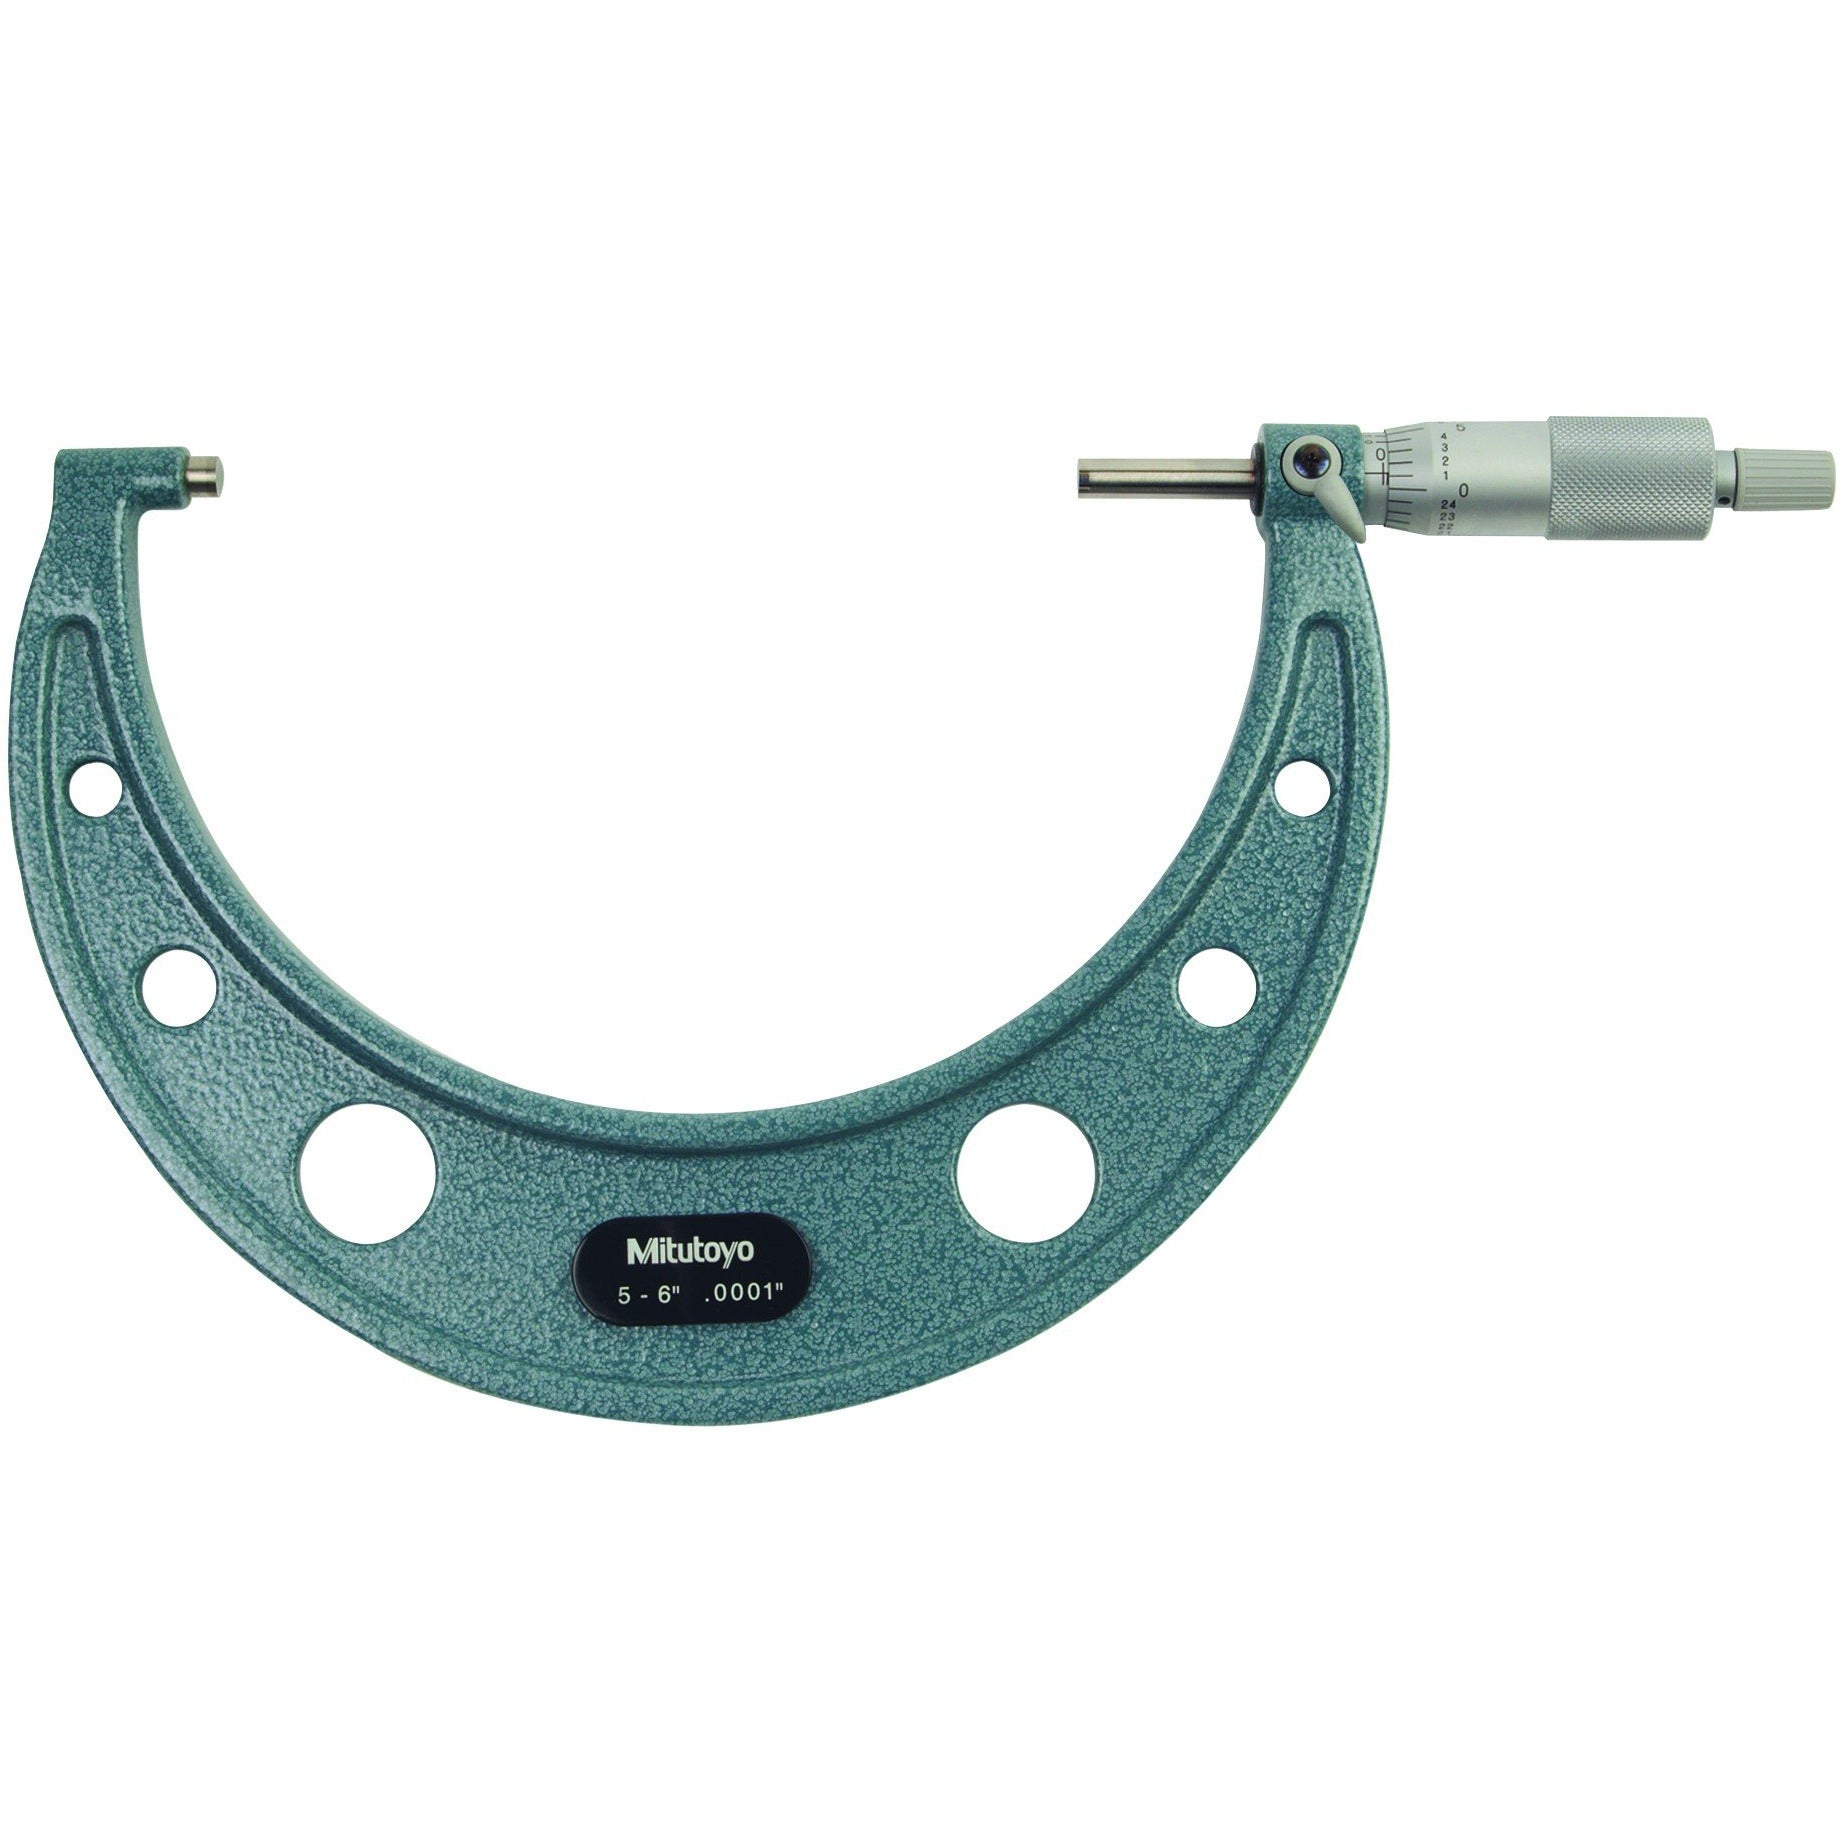 Mitutoyo Outside Micrometer 5-6" x .001"-Mitutoyo-Tool Factory